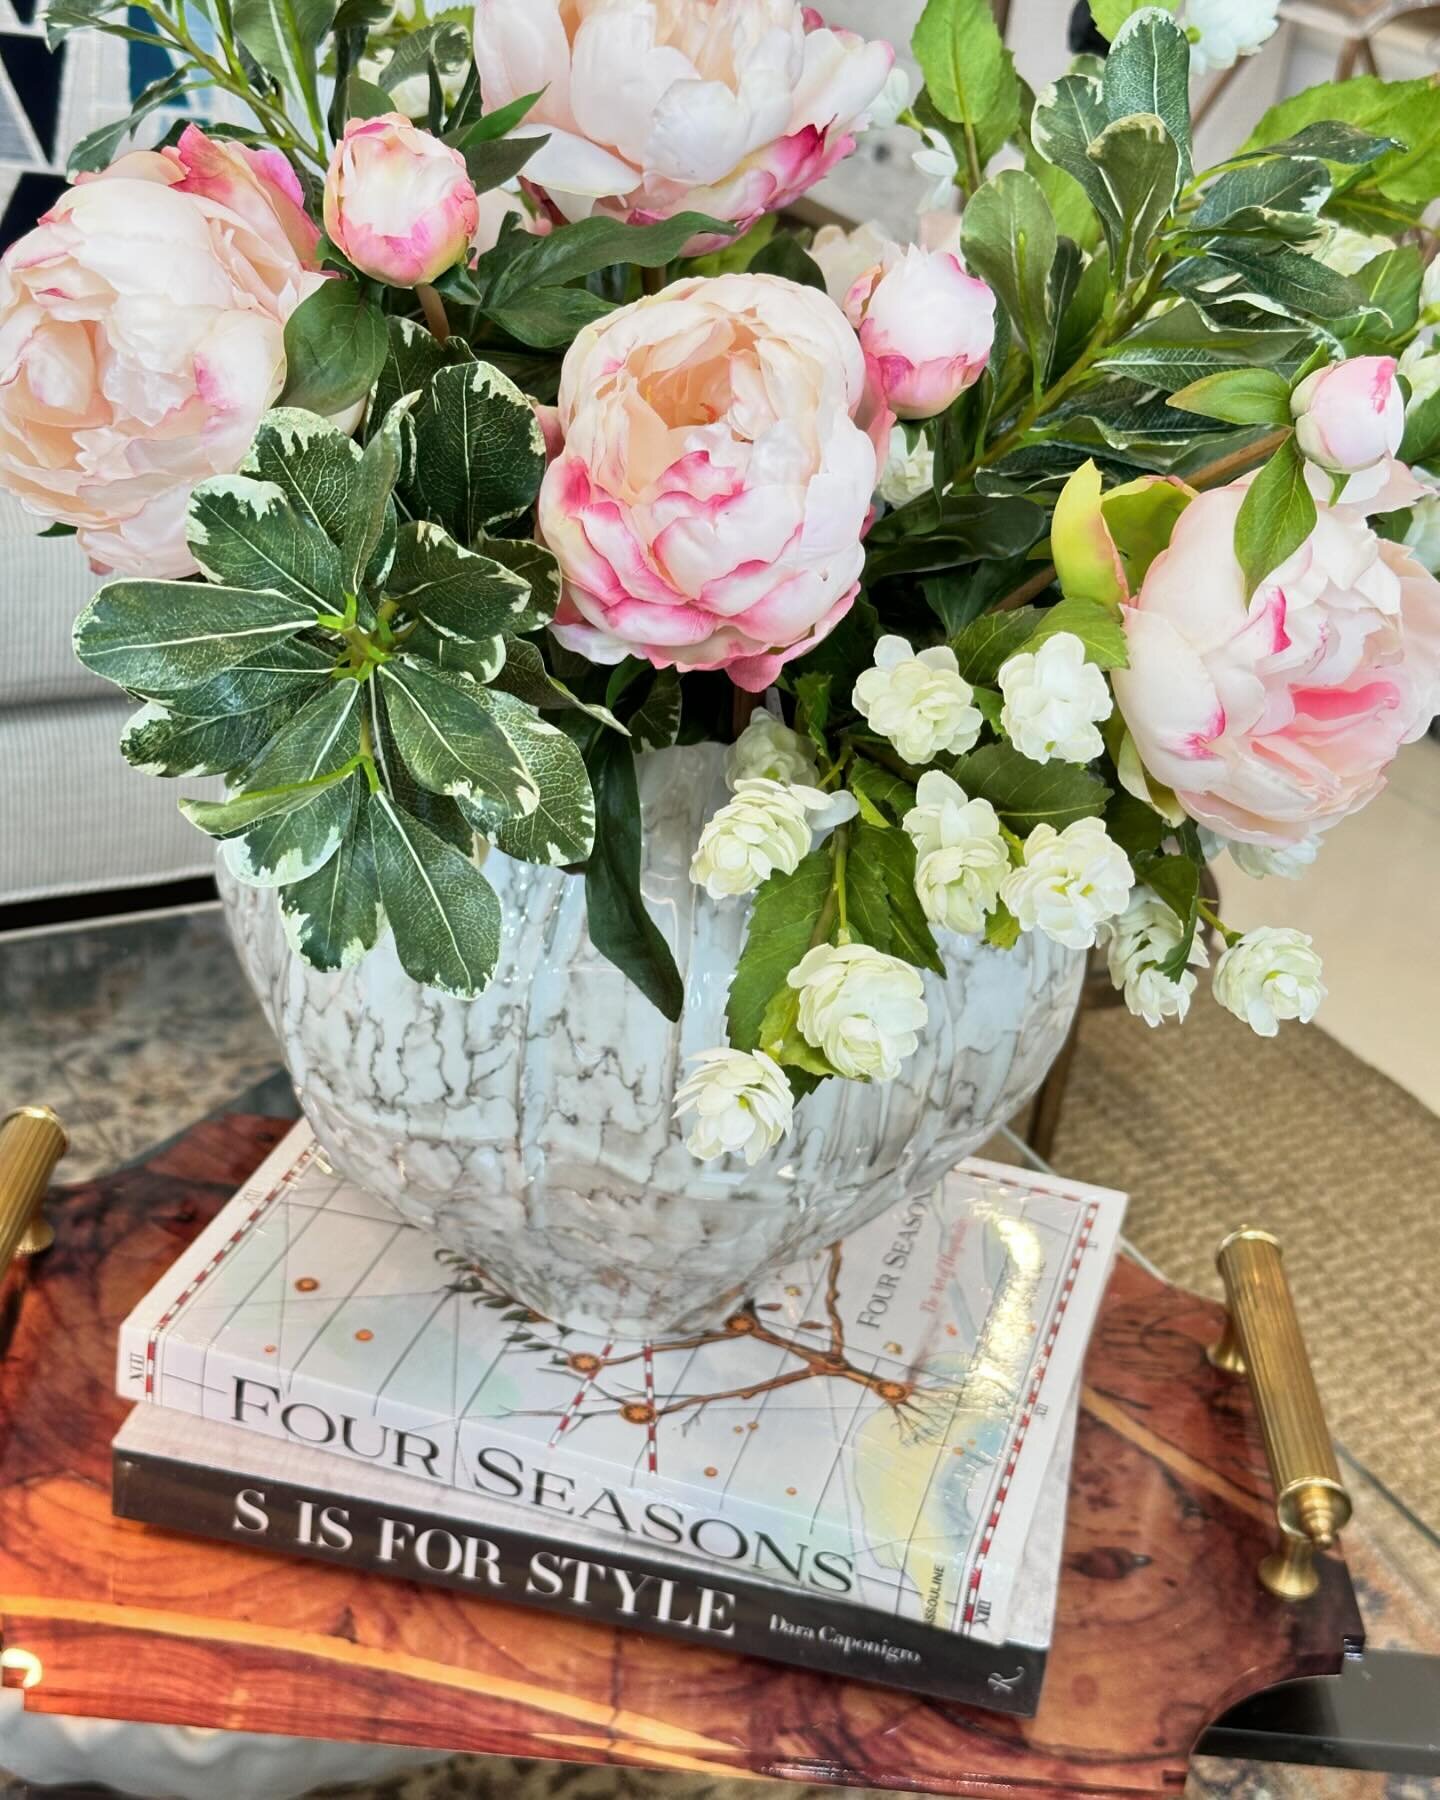 Still life. These peonies power up this spring arrangement and never go out of season&hellip;FAUX REAL! I&rsquo;m amazed by the beautiful silk floral available today&hellip;check out the greenery that looks like it was just cut from the garden. While